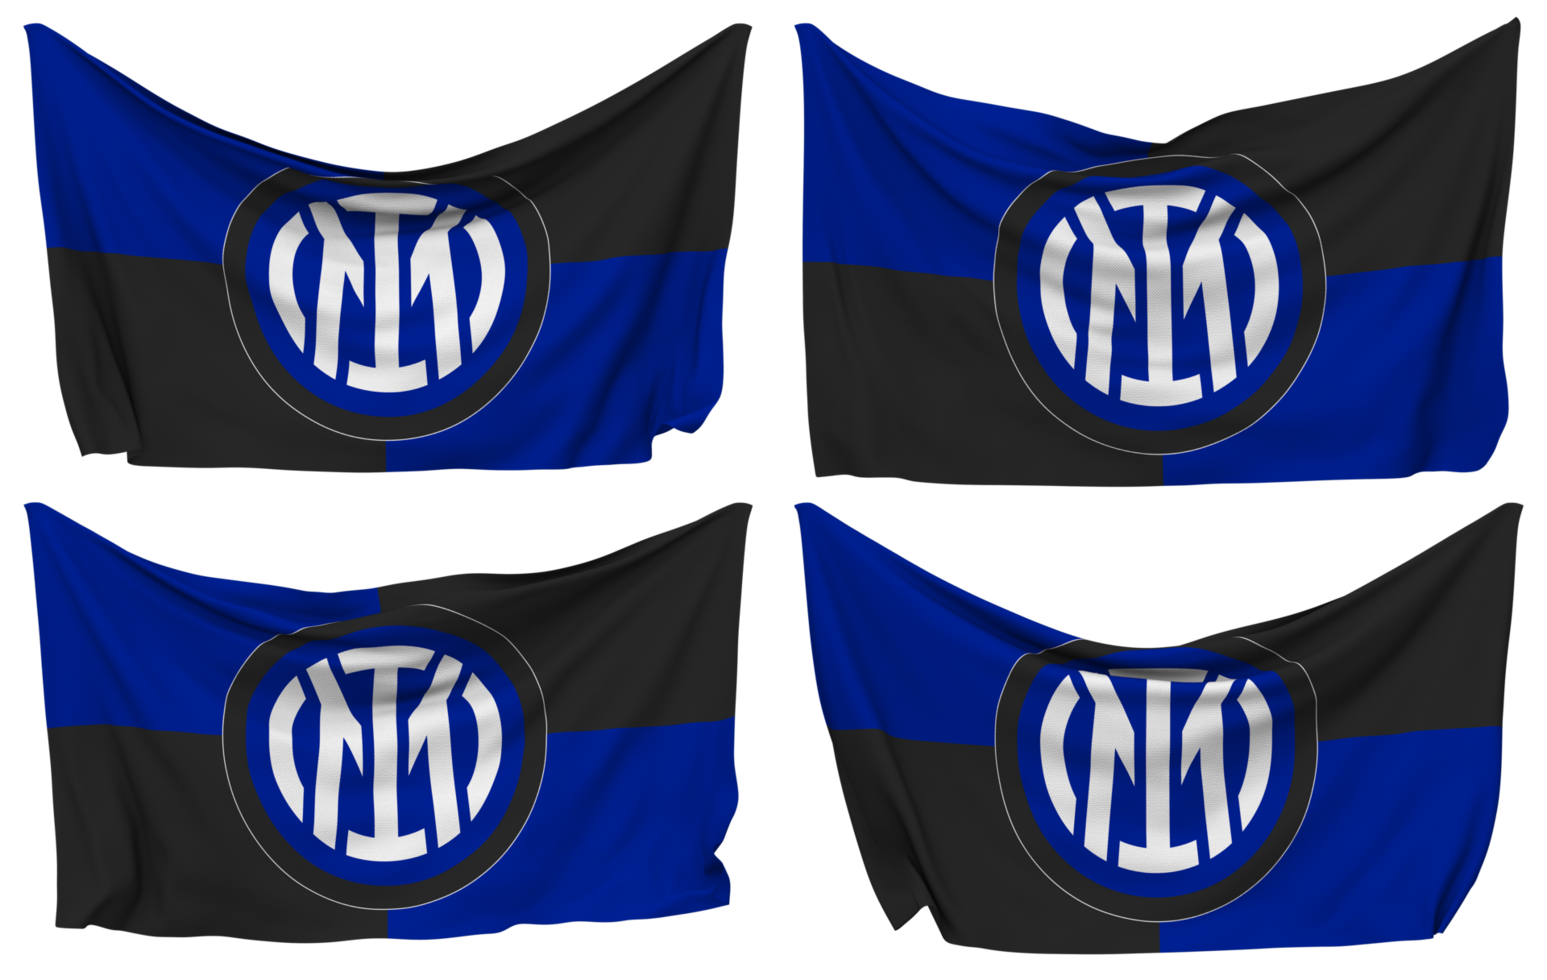 Societa Sportiva Calcio Napoli, SSC Napoli Flag Waves Isolated in Plain and  Bump Texture, with Transparent Background, 3D Rendering 23398902 PNG